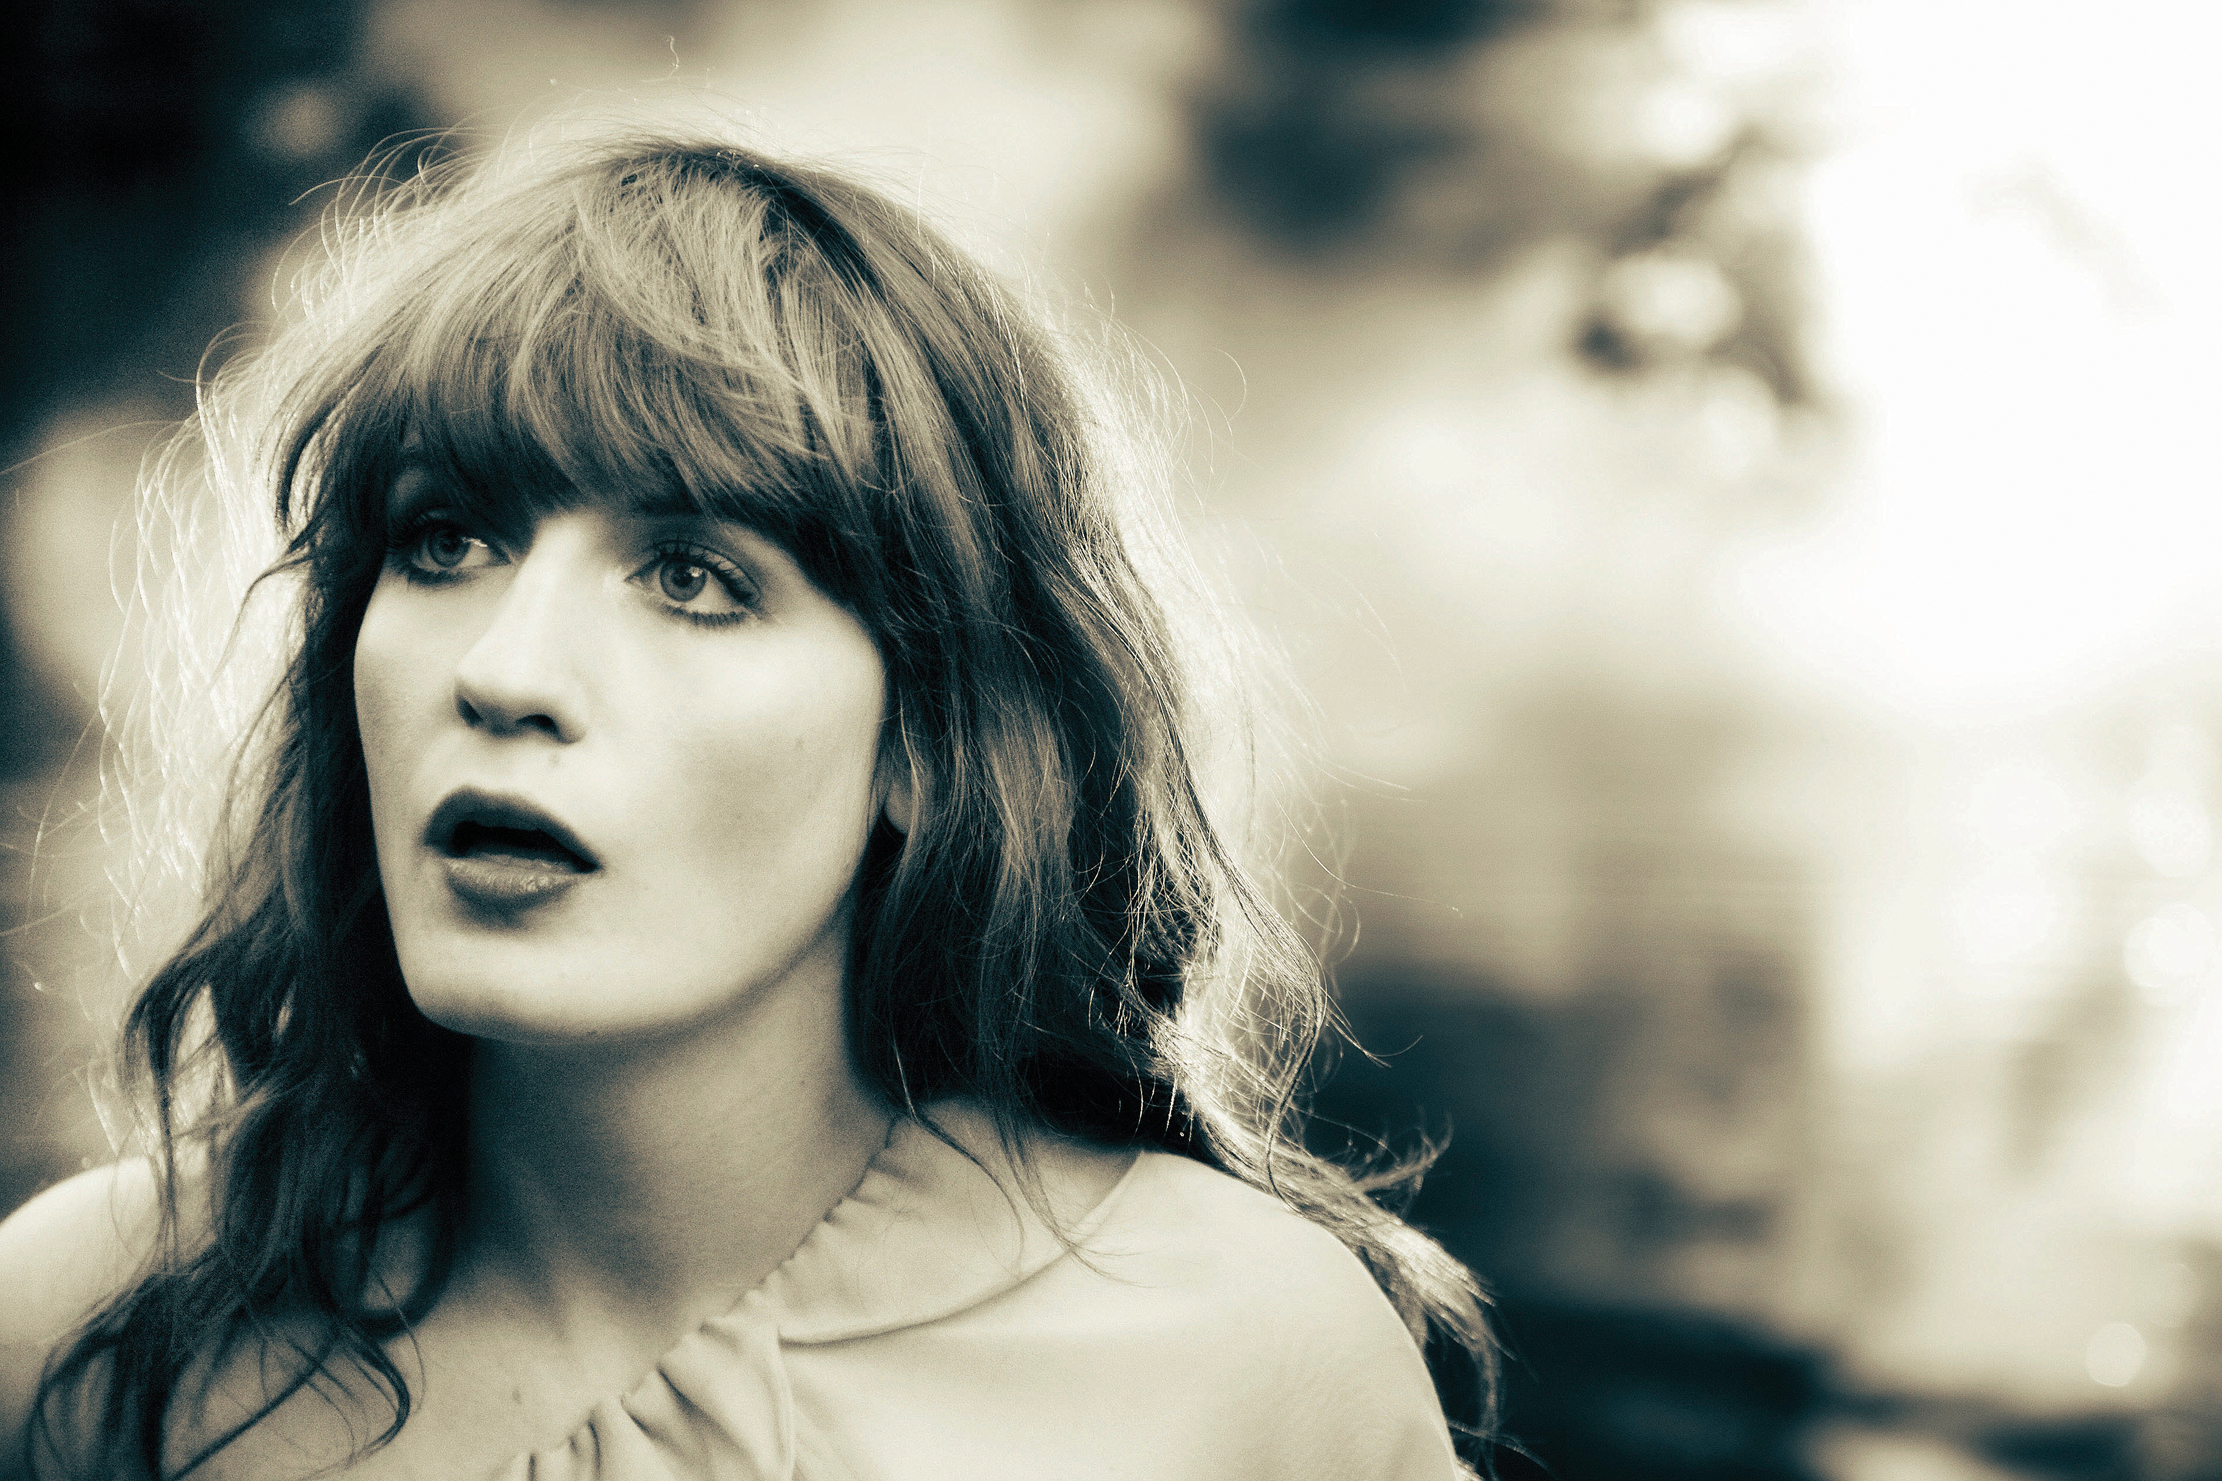 Women Singer Open Mouth Florence Welch 2222x1481